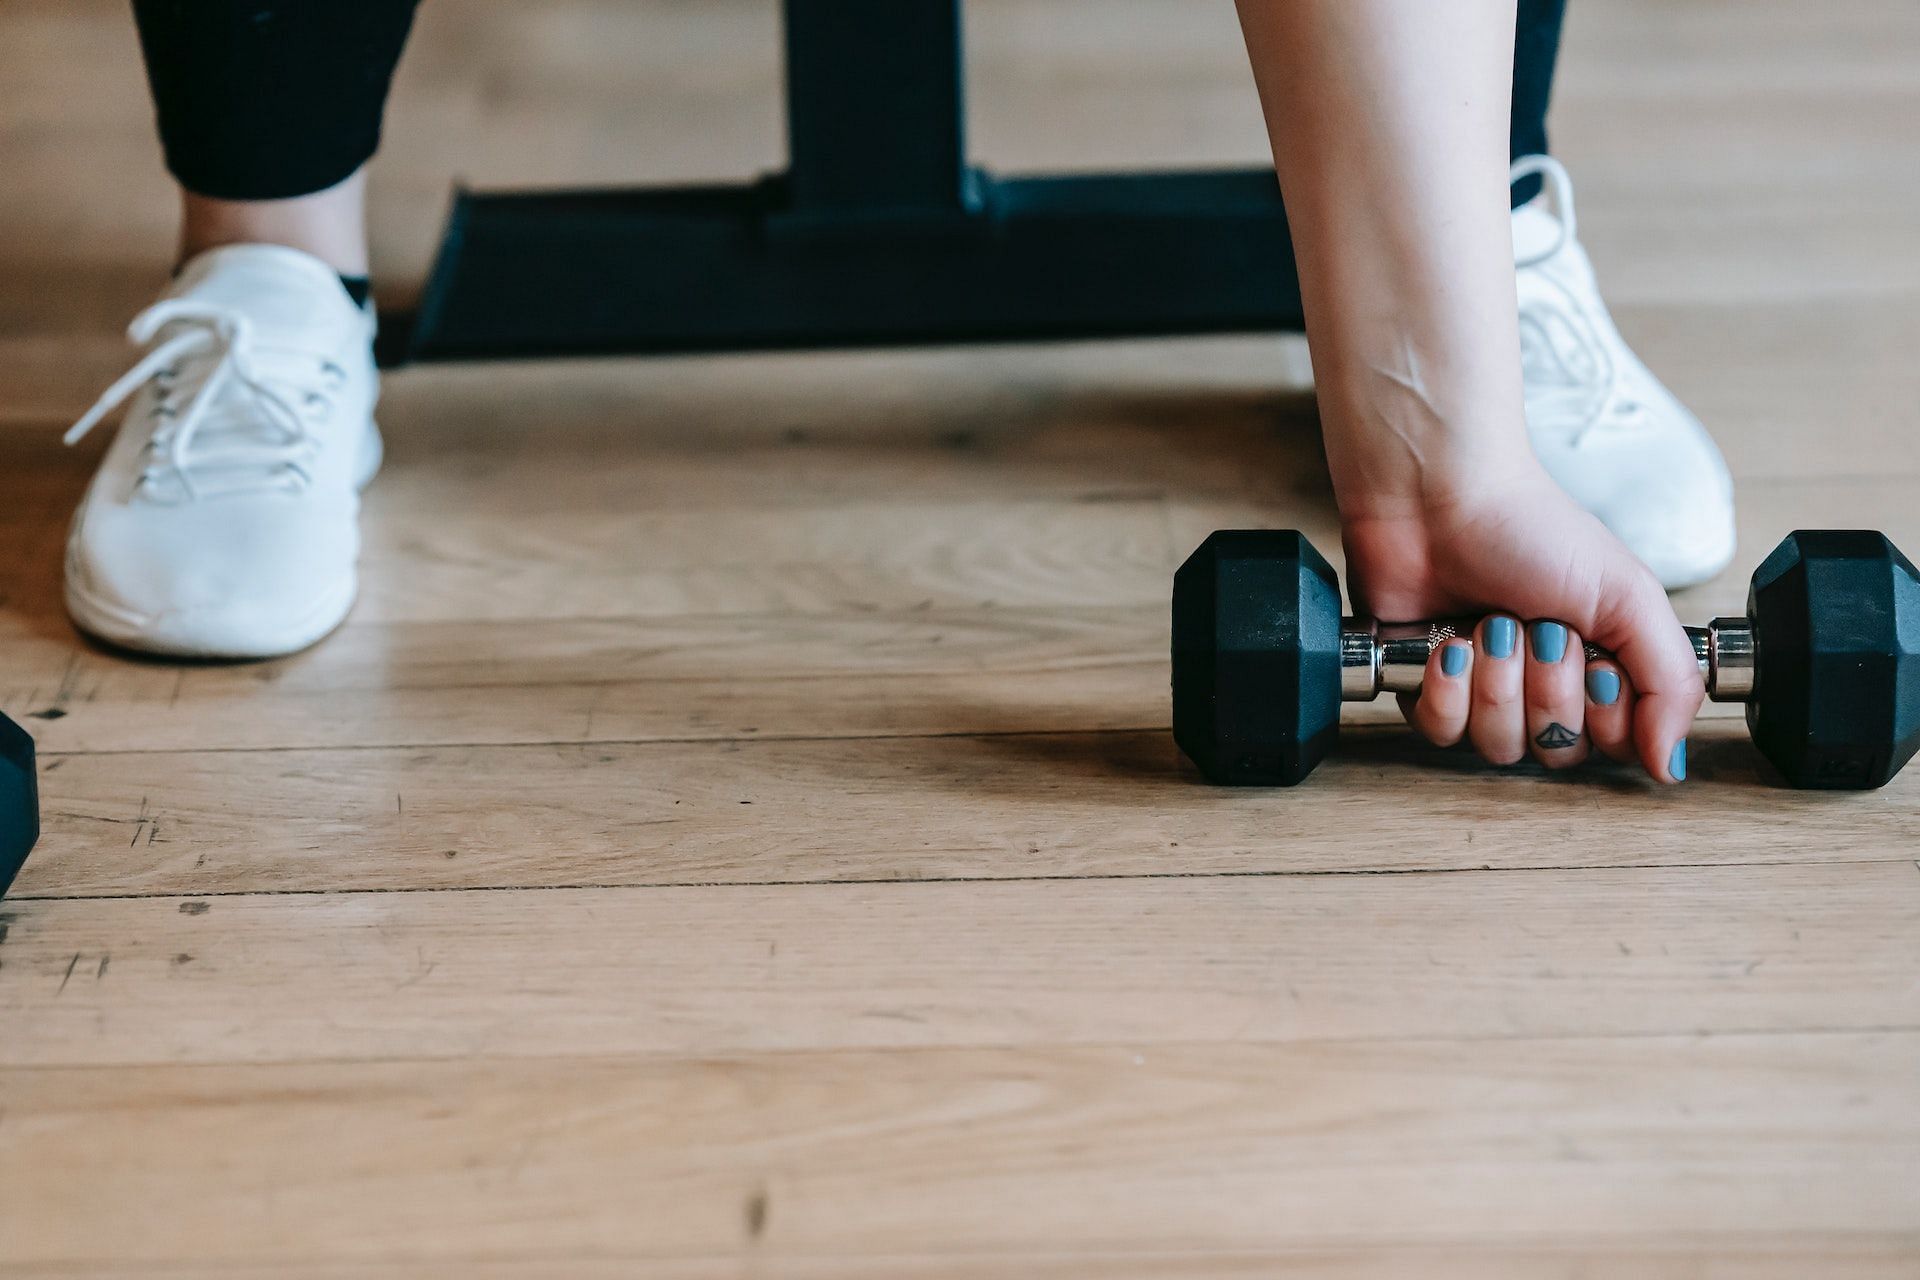 Dumbbell exercises are suitable for beginners. (Photo via Pexels/Andres Ayrton)